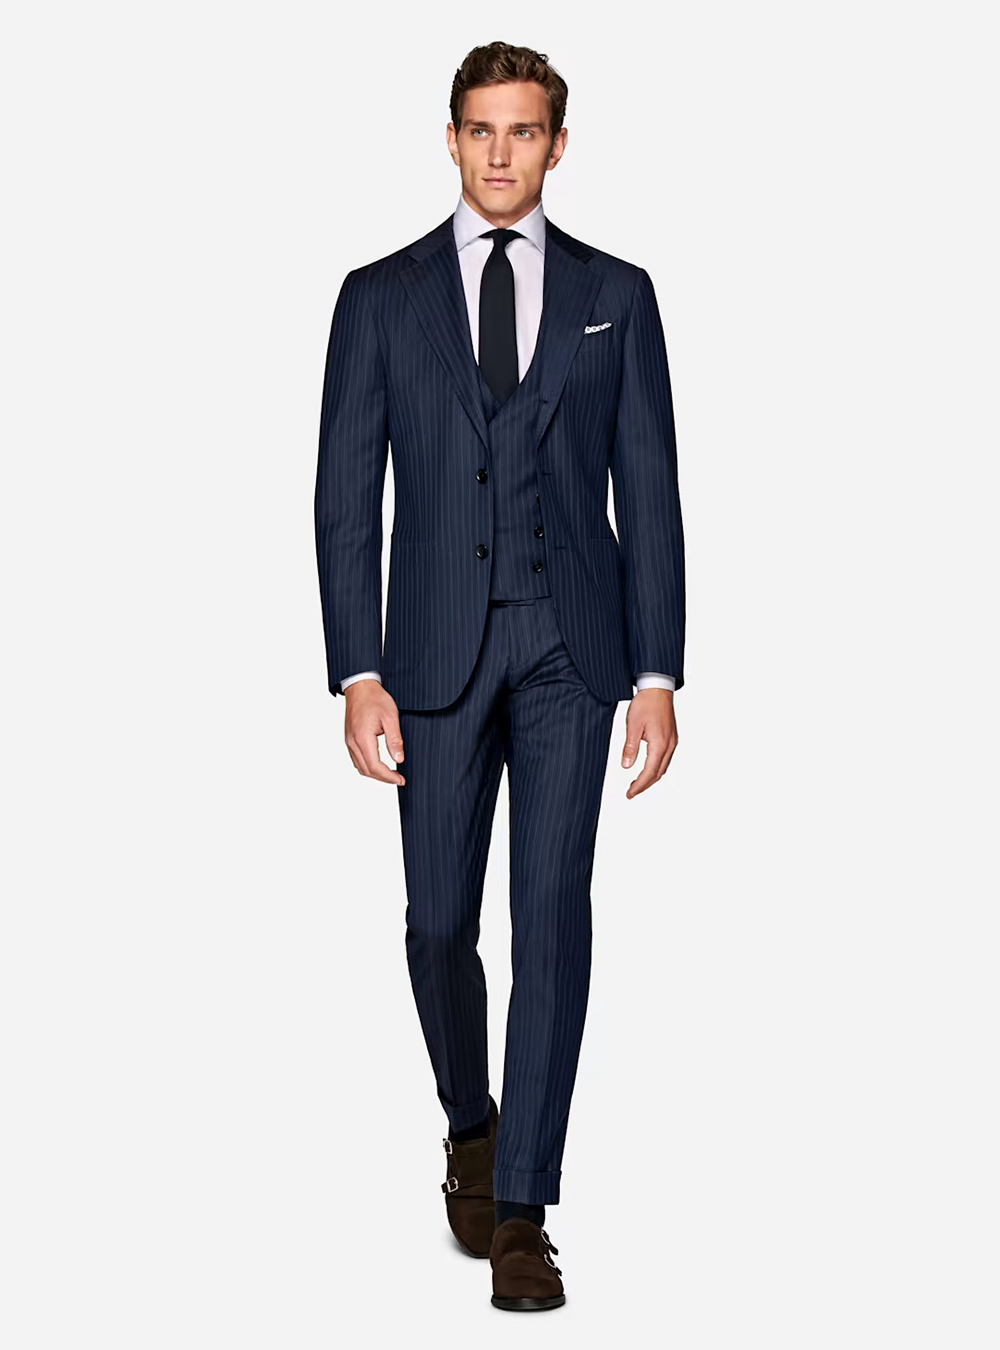 pinstripe blue three-piece suit, white shirt, and brown suede monk straps